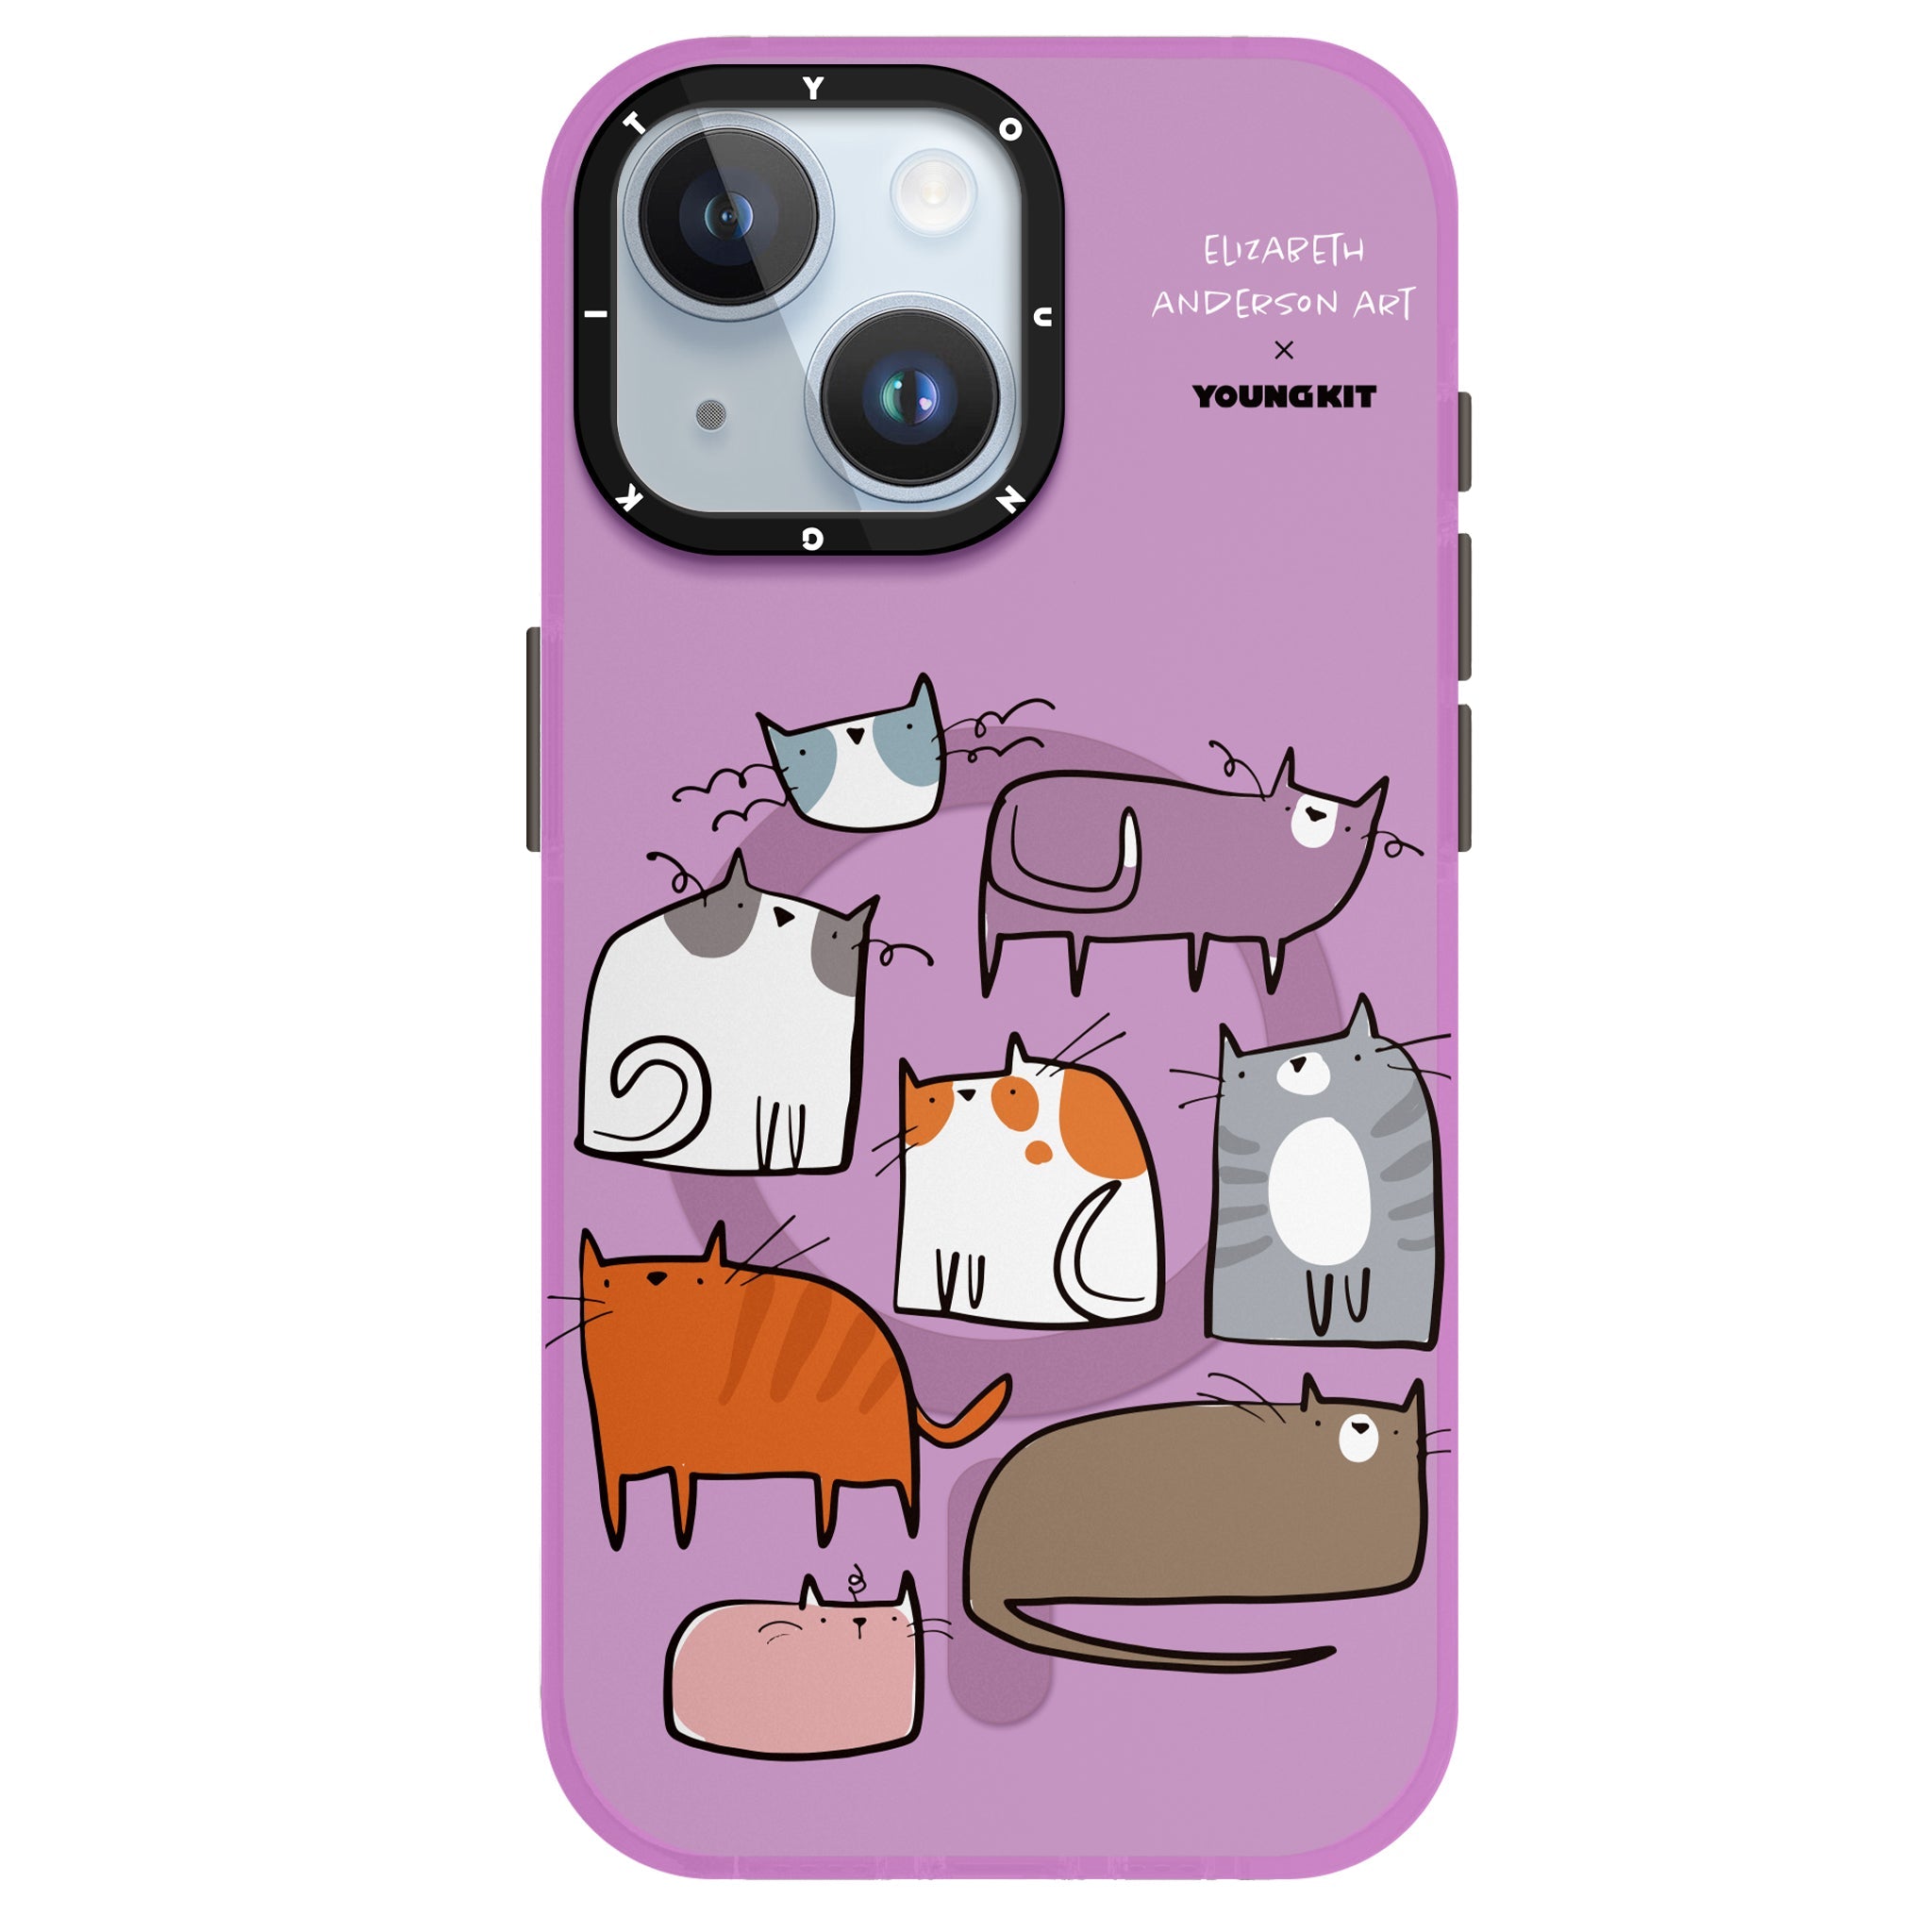 YOUNGKIT X Elizabeth Anderson Art MagSafe iPhone14/15 Case-Carnival